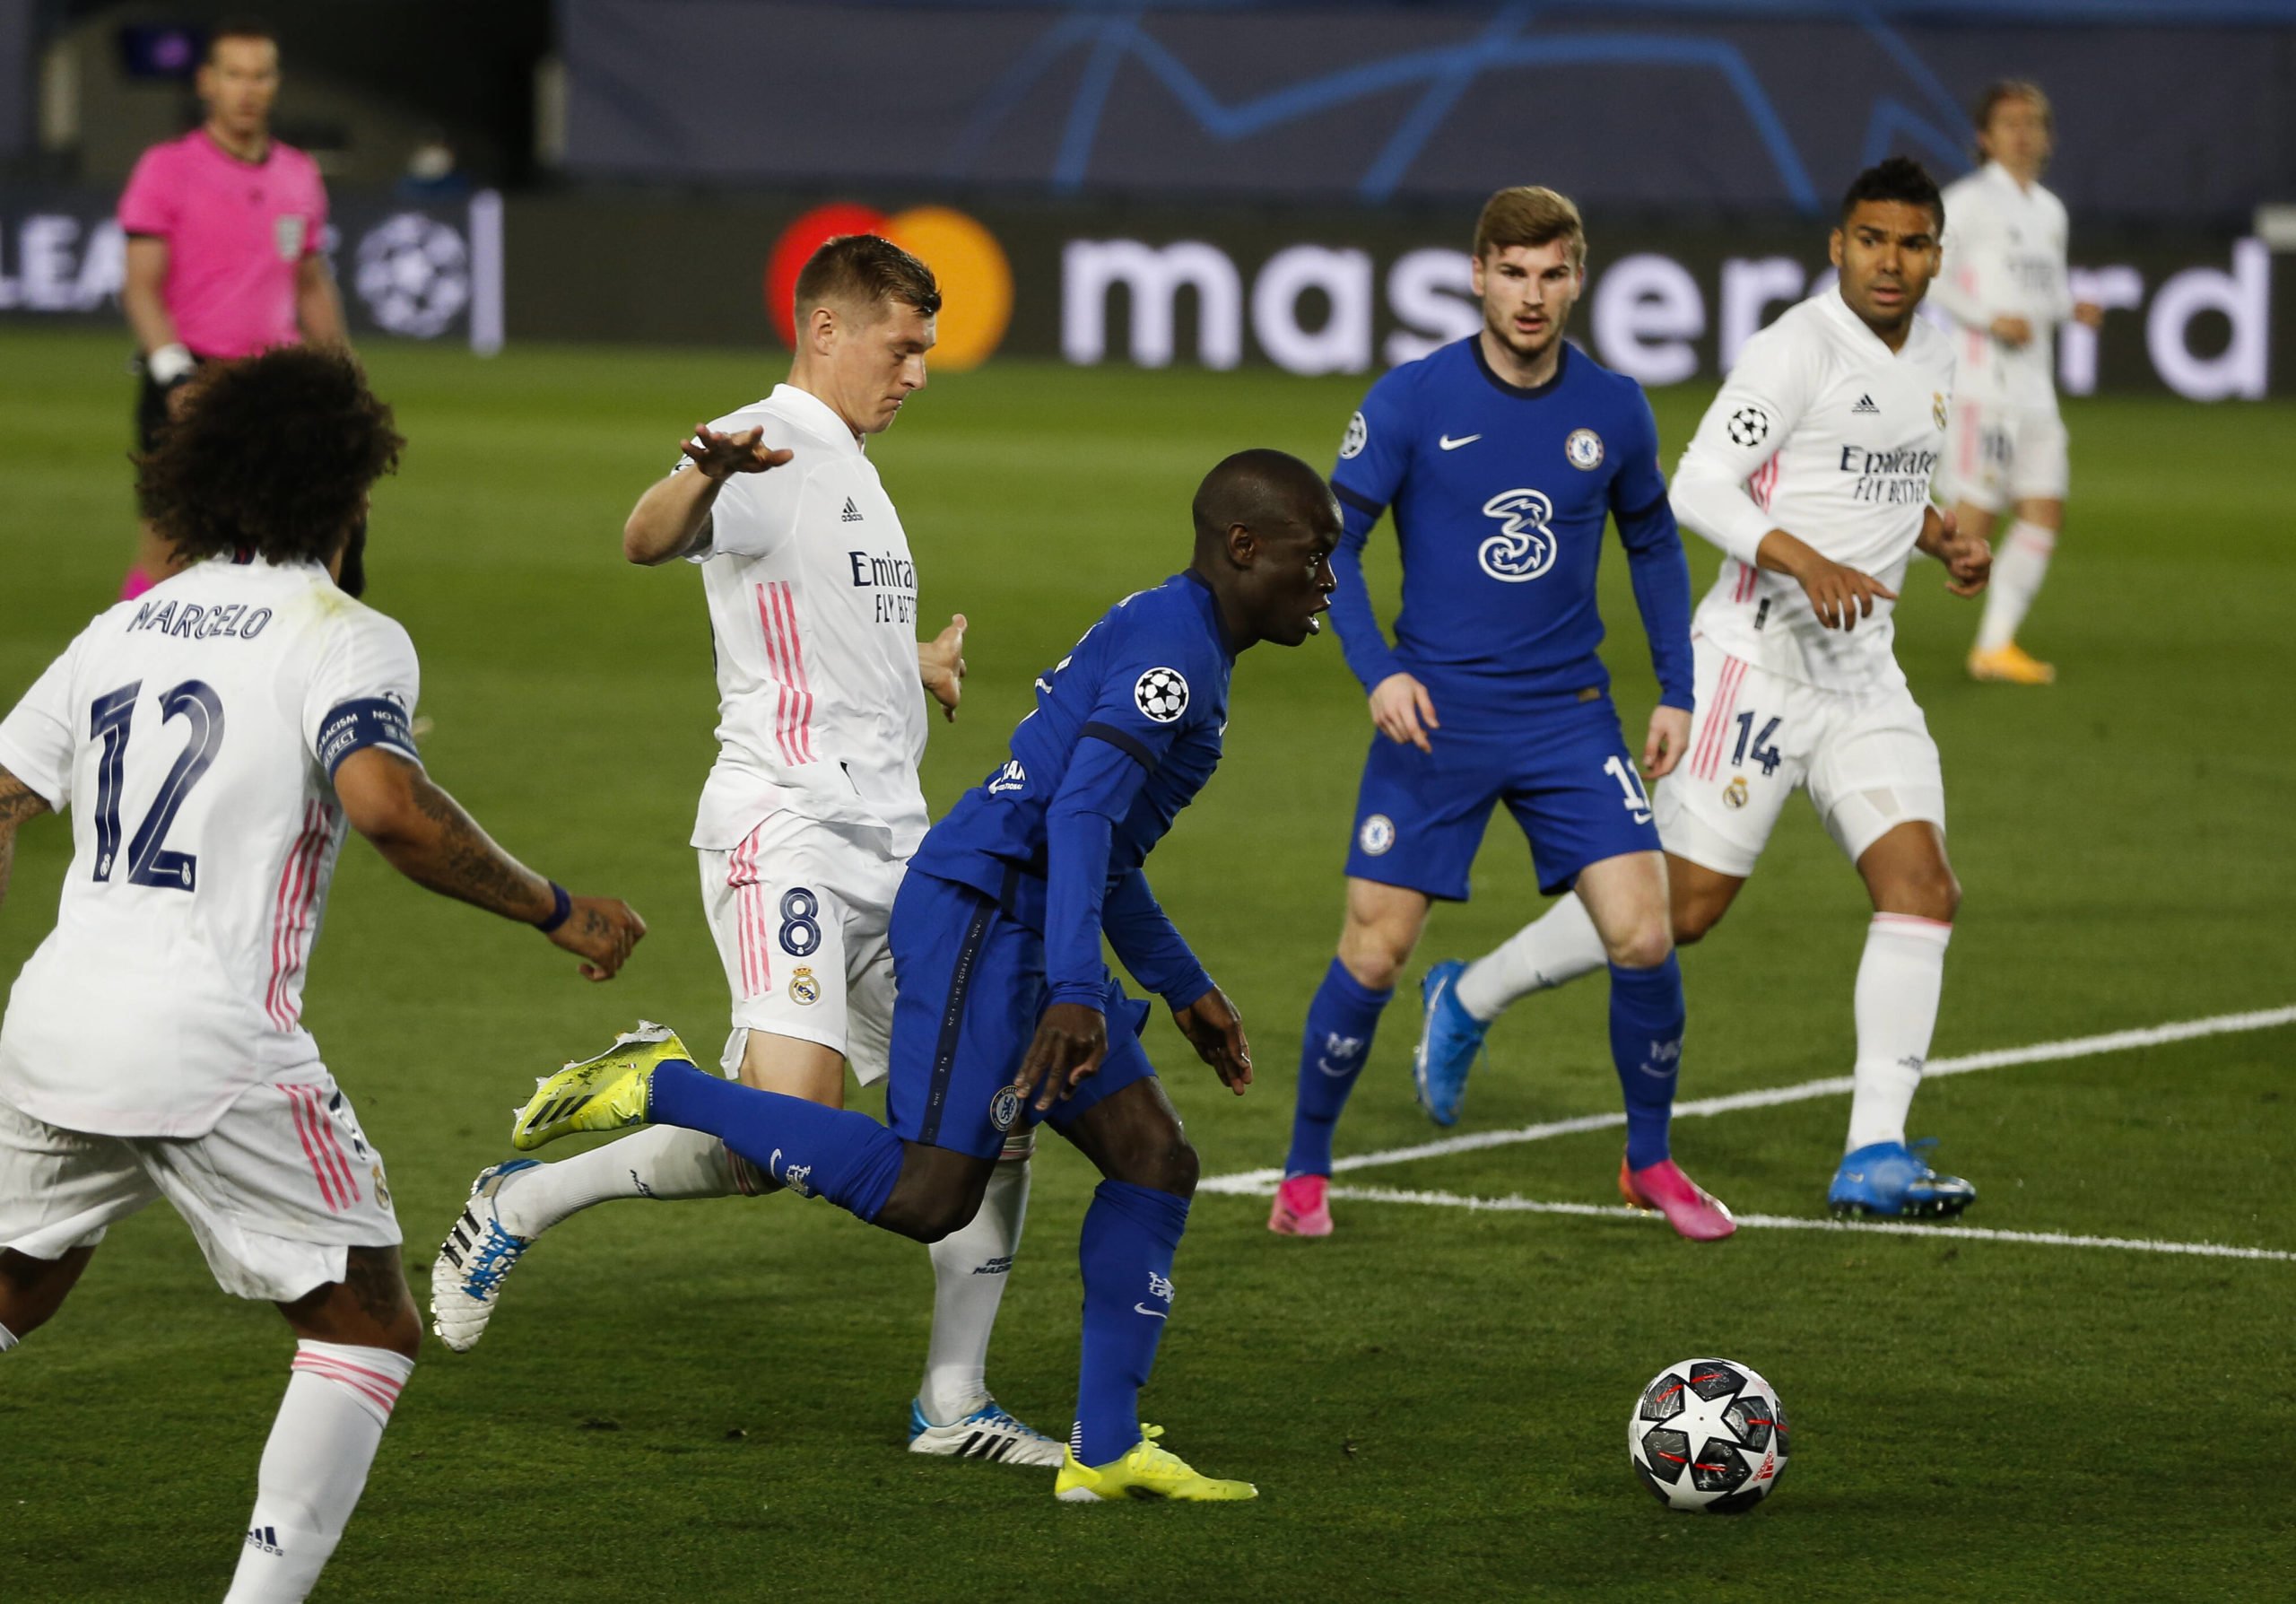 Real Madrid eyeing a move for N'Golo Kante who is seen in the picture